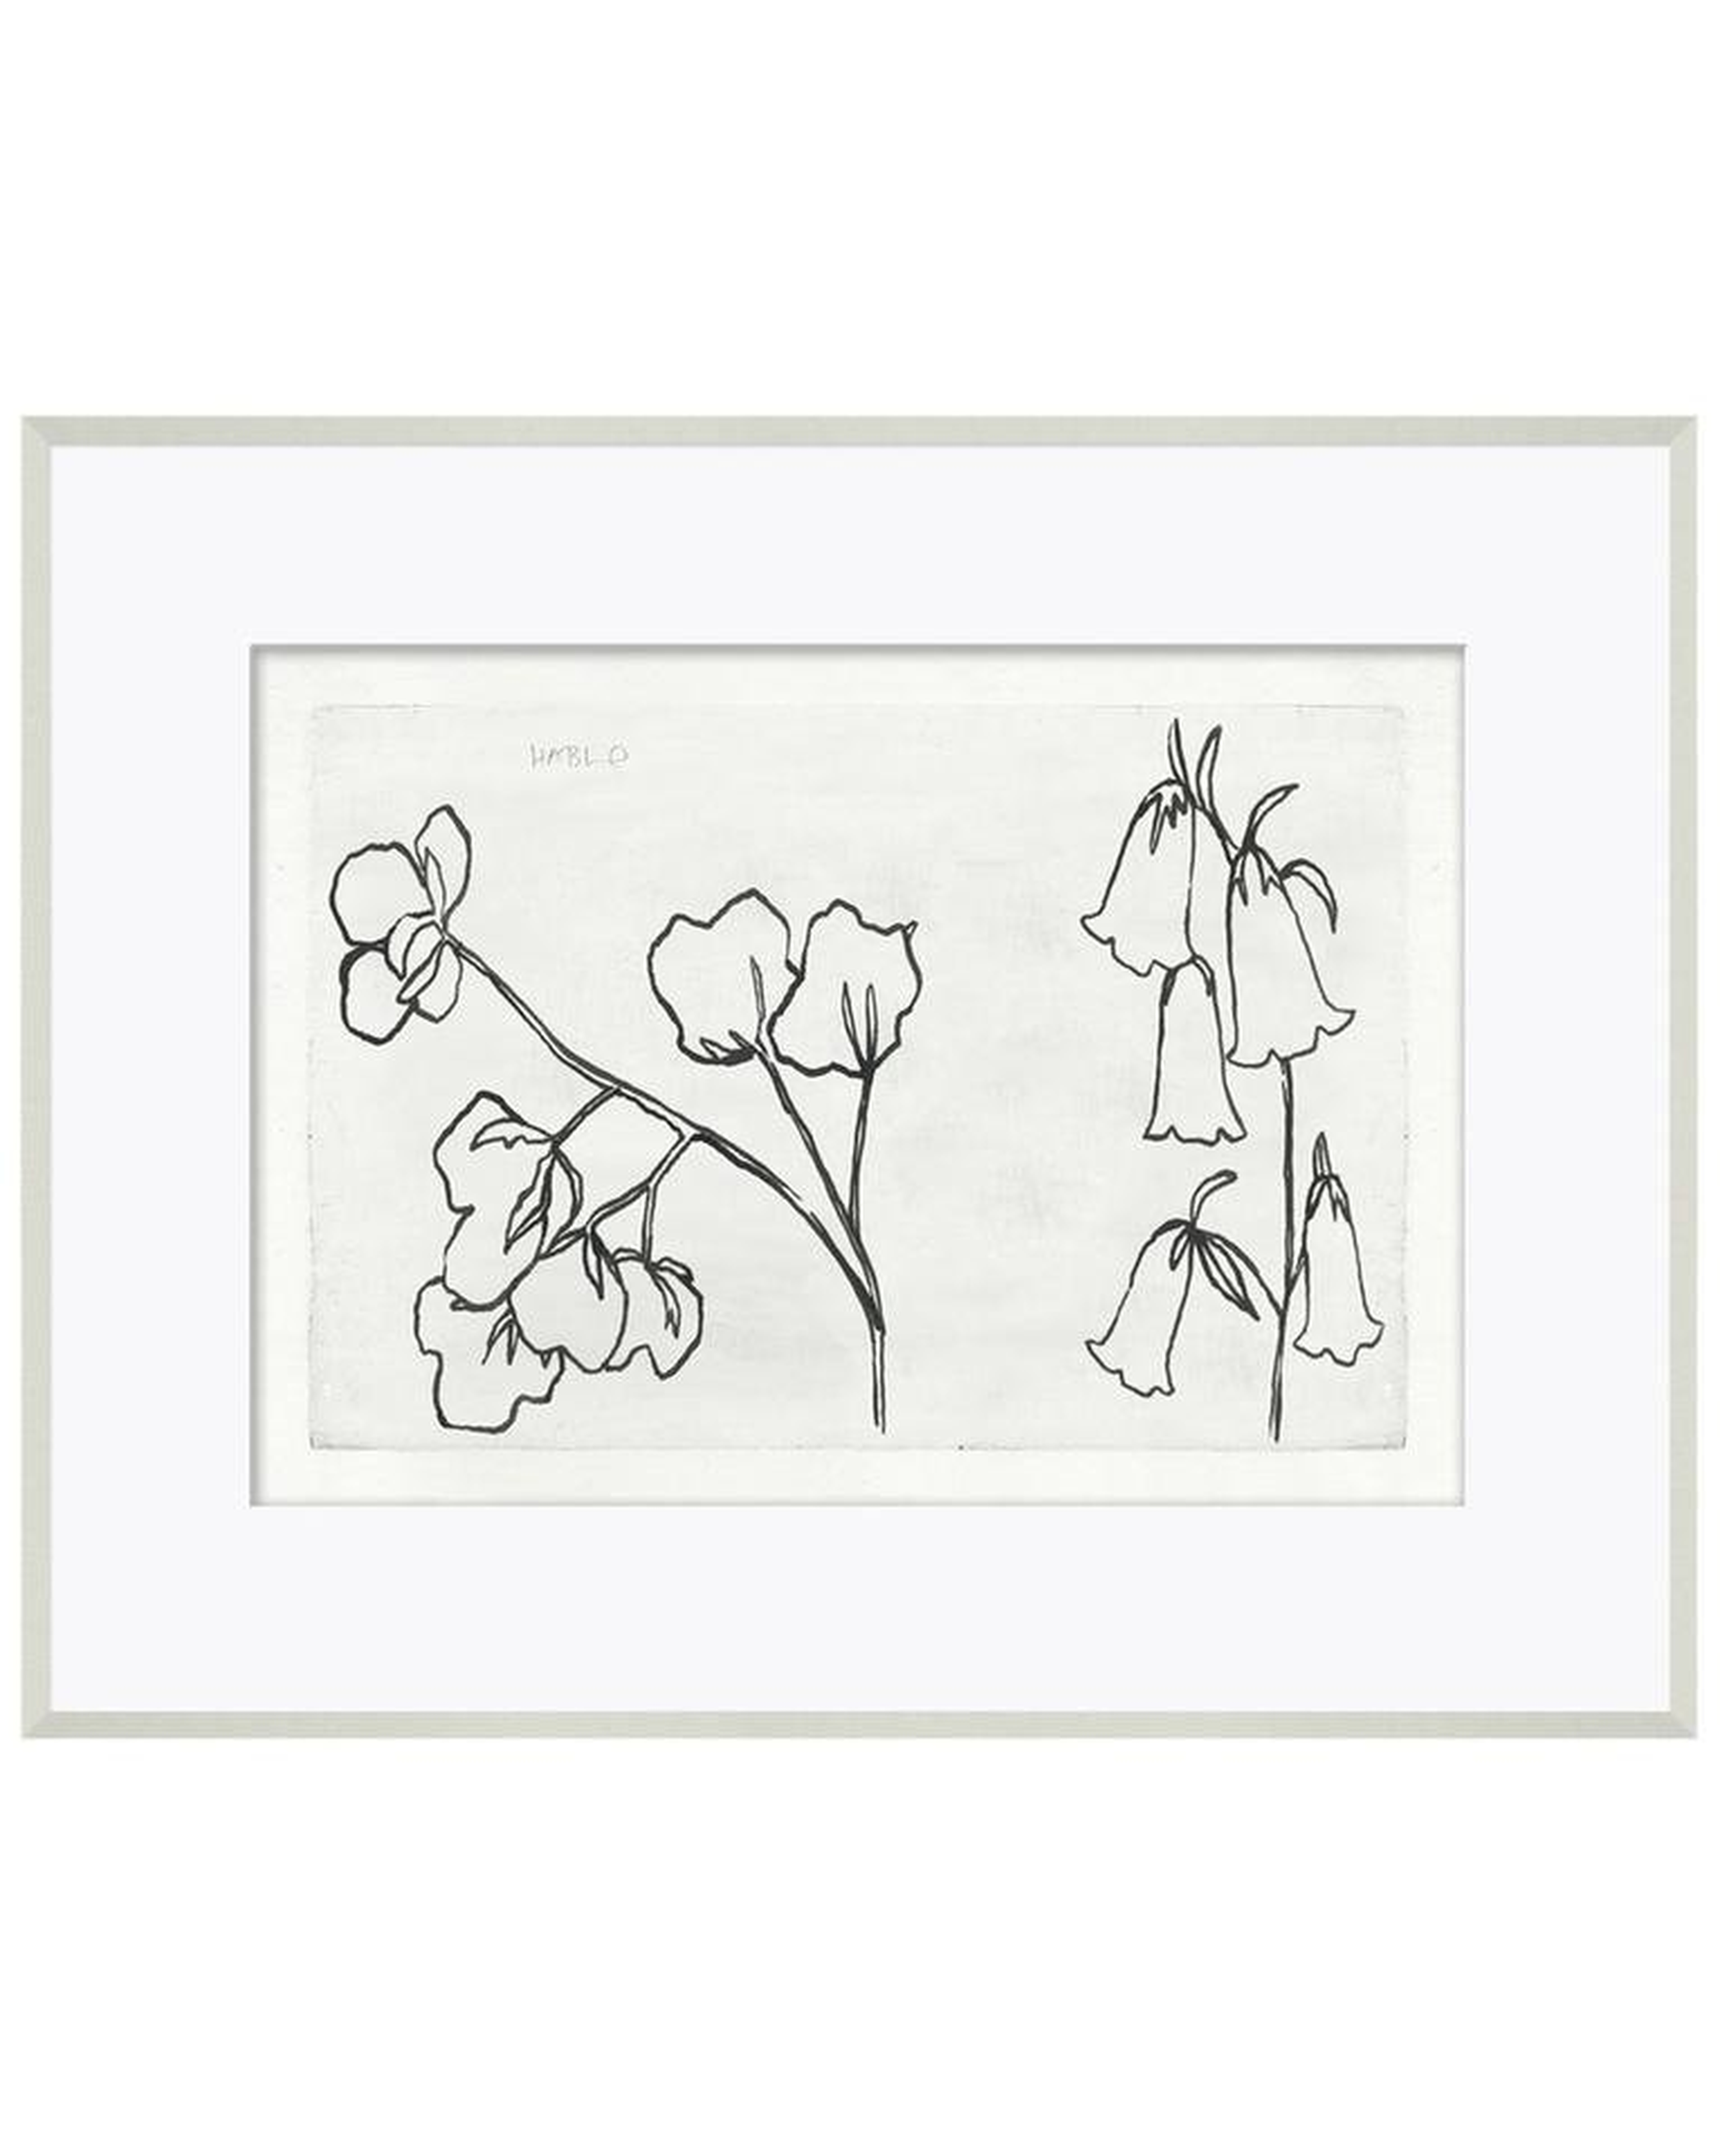 COTTON SKETCH Framed Art - McGee & Co.